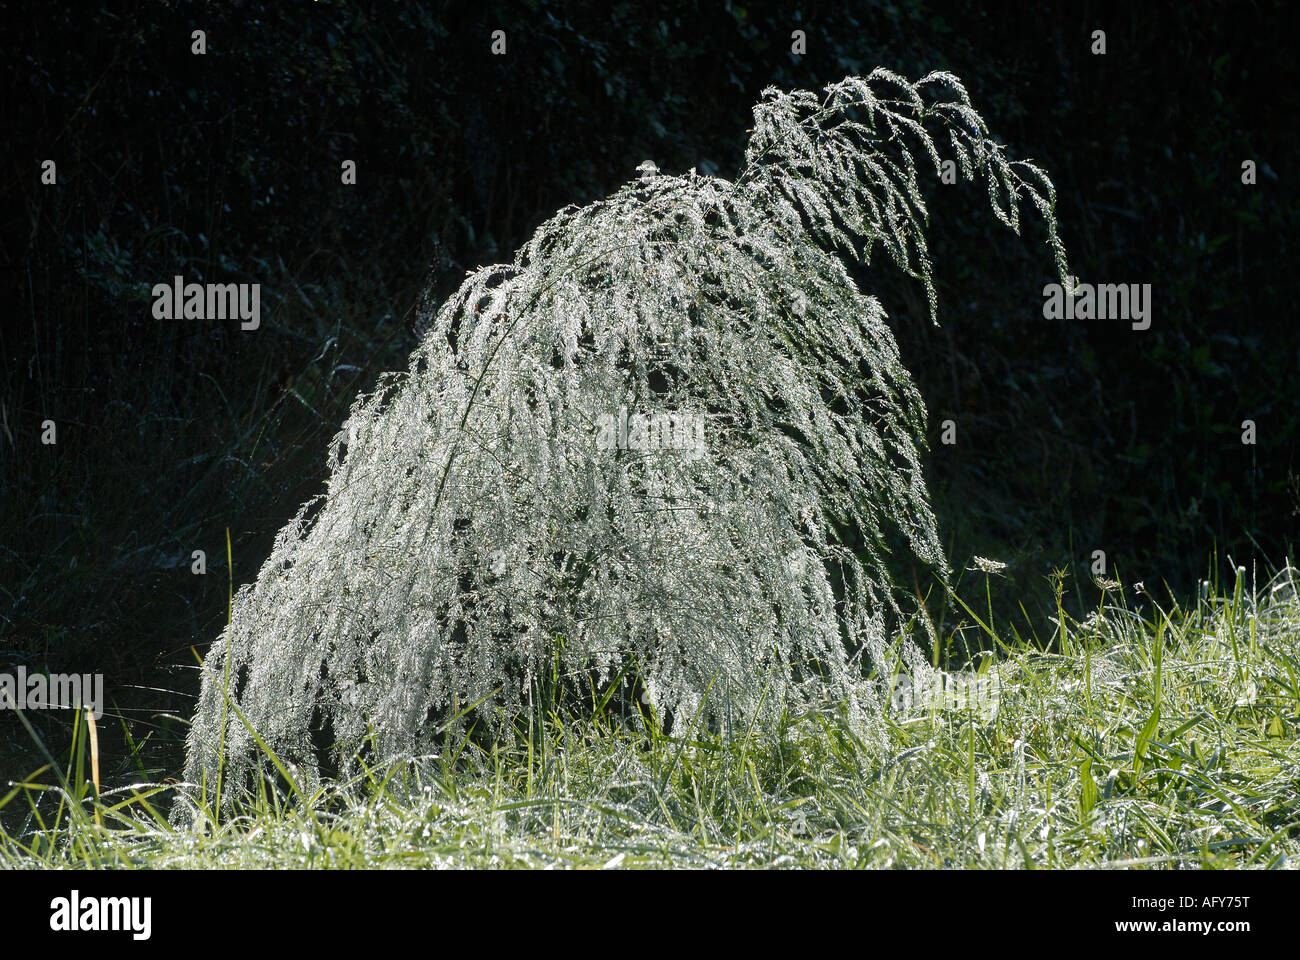 Wild Asparagus - Asparagus officinalis - covered in morning dew, La Brenne, France. Stock Photo